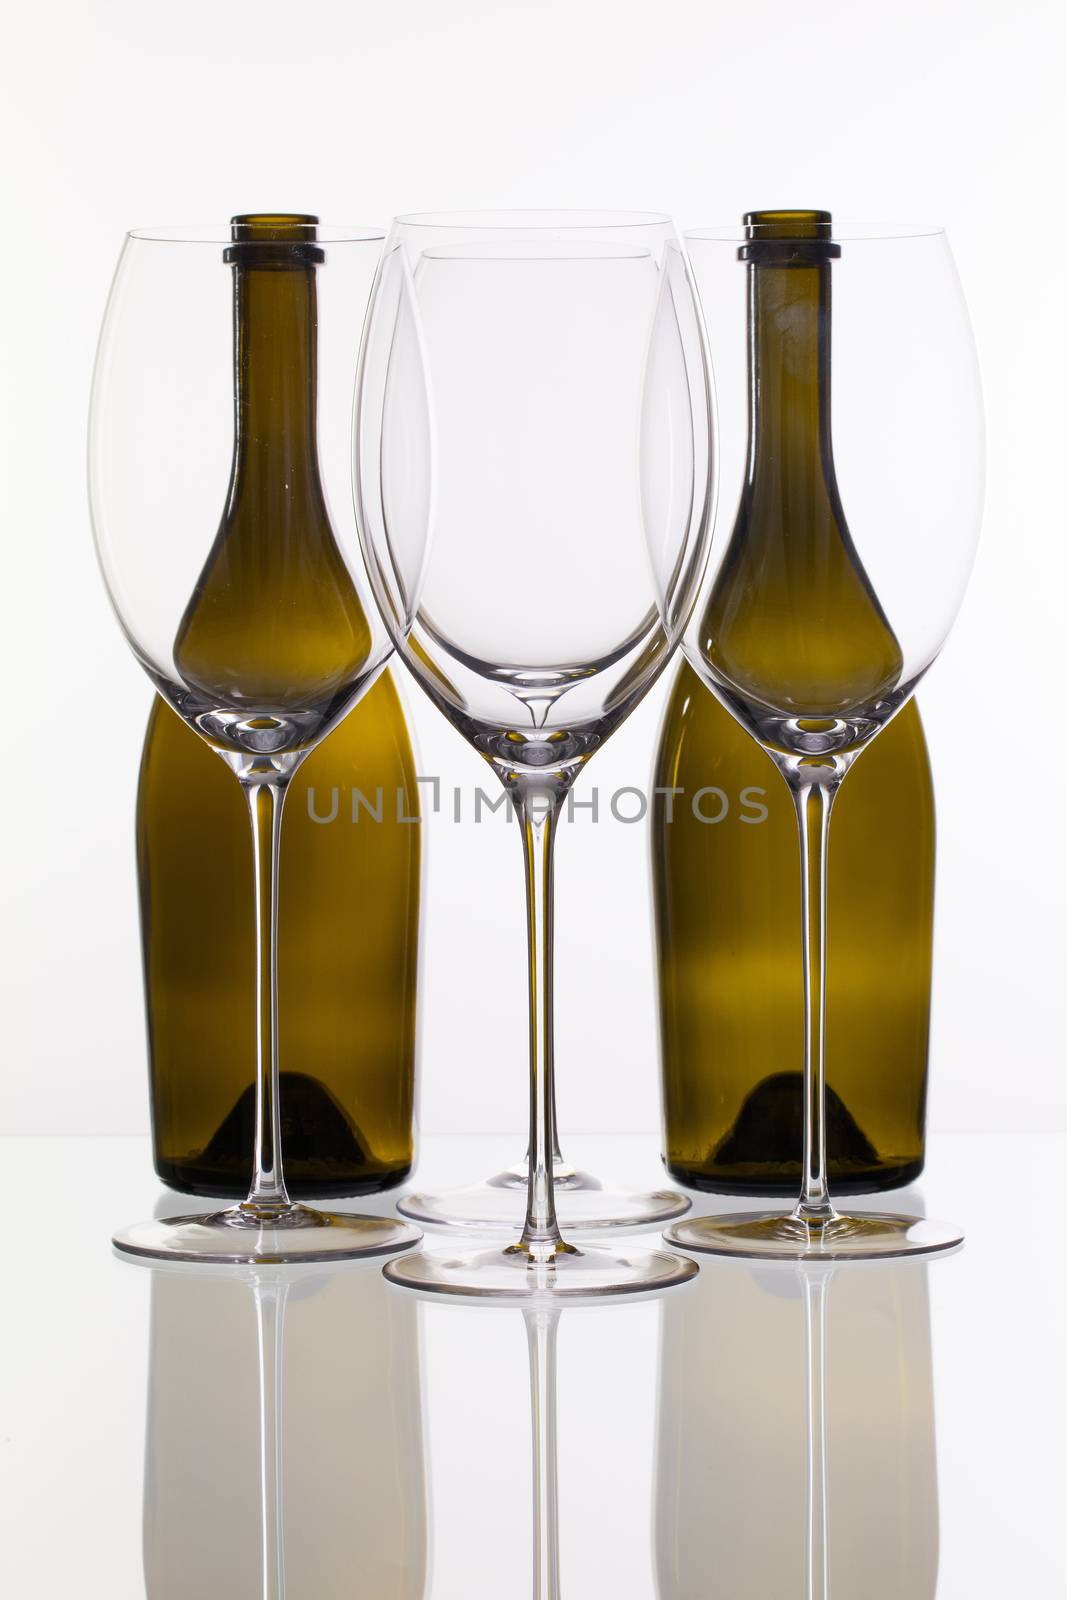 Four wine glasses and two bottle on a glass plate